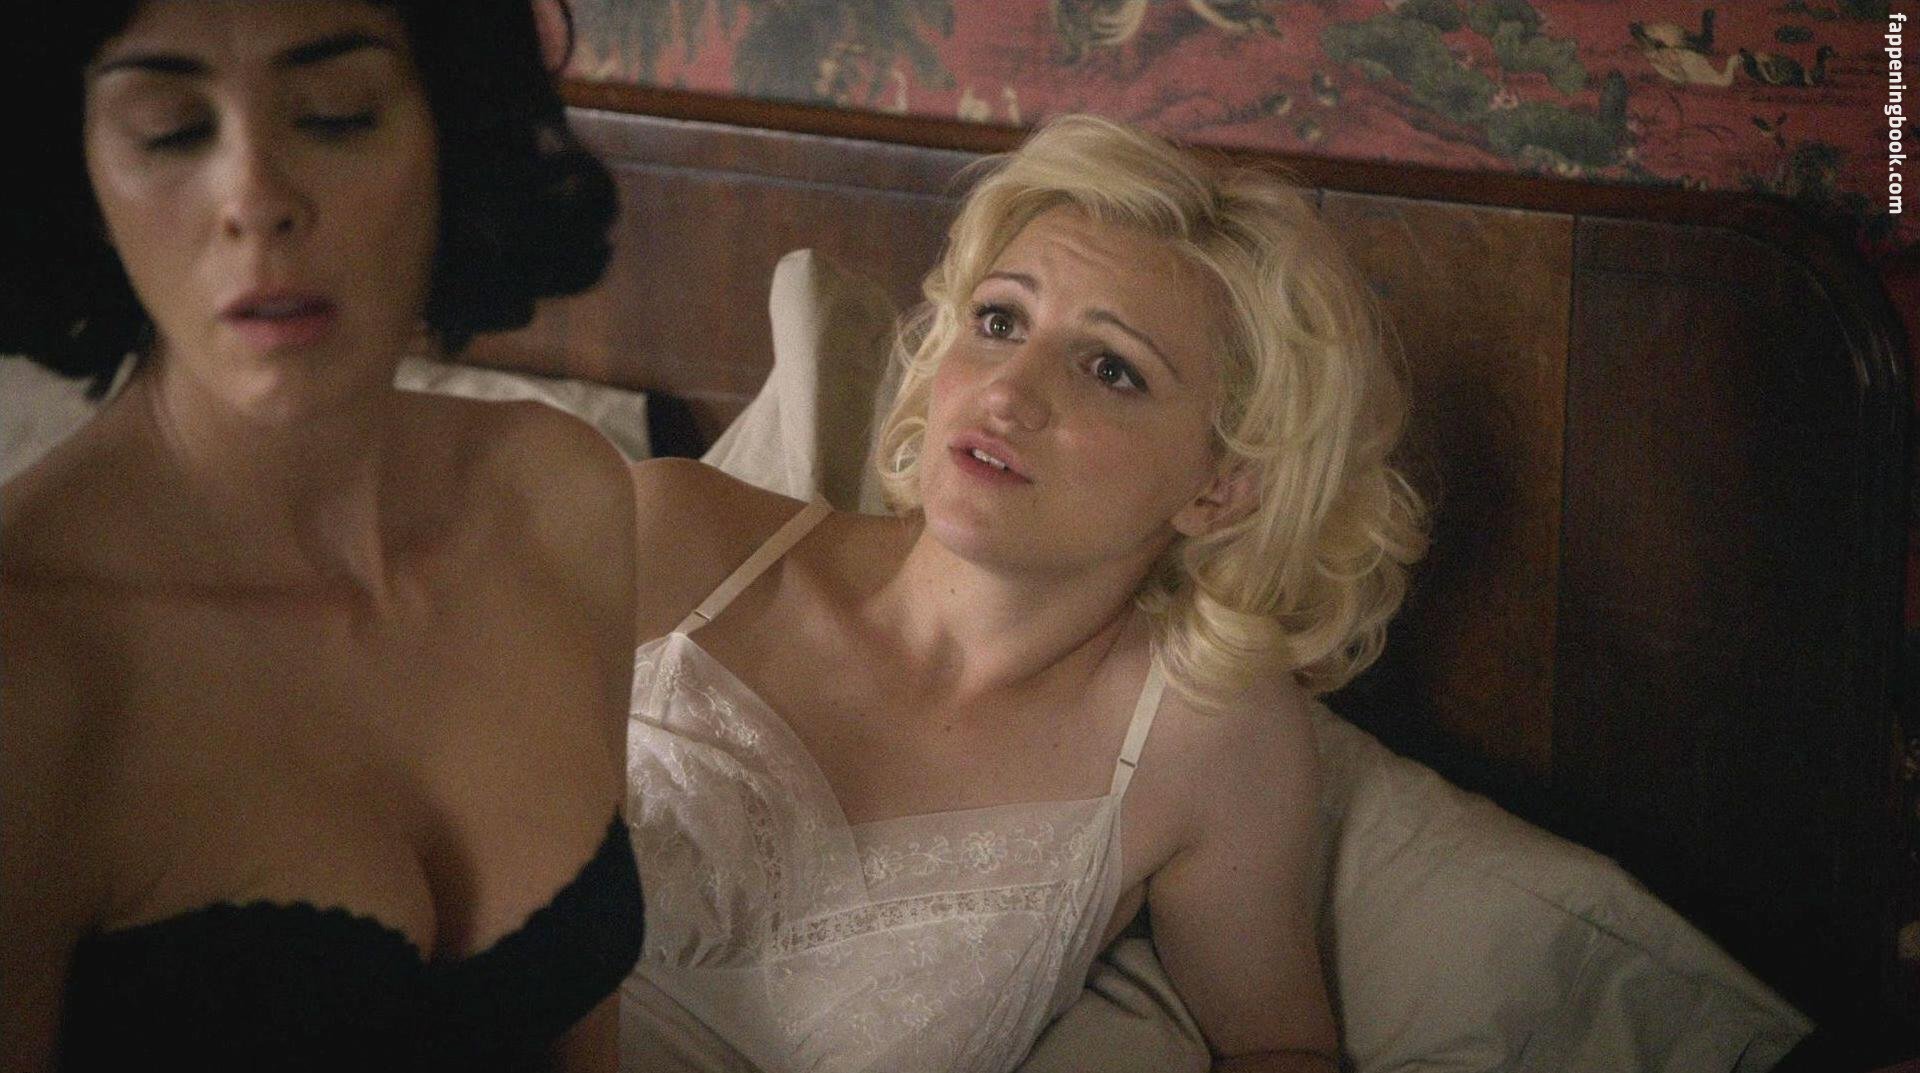 Annaleigh Ashford Nude, The Fappening - Photo #42232 - FappeningBook.